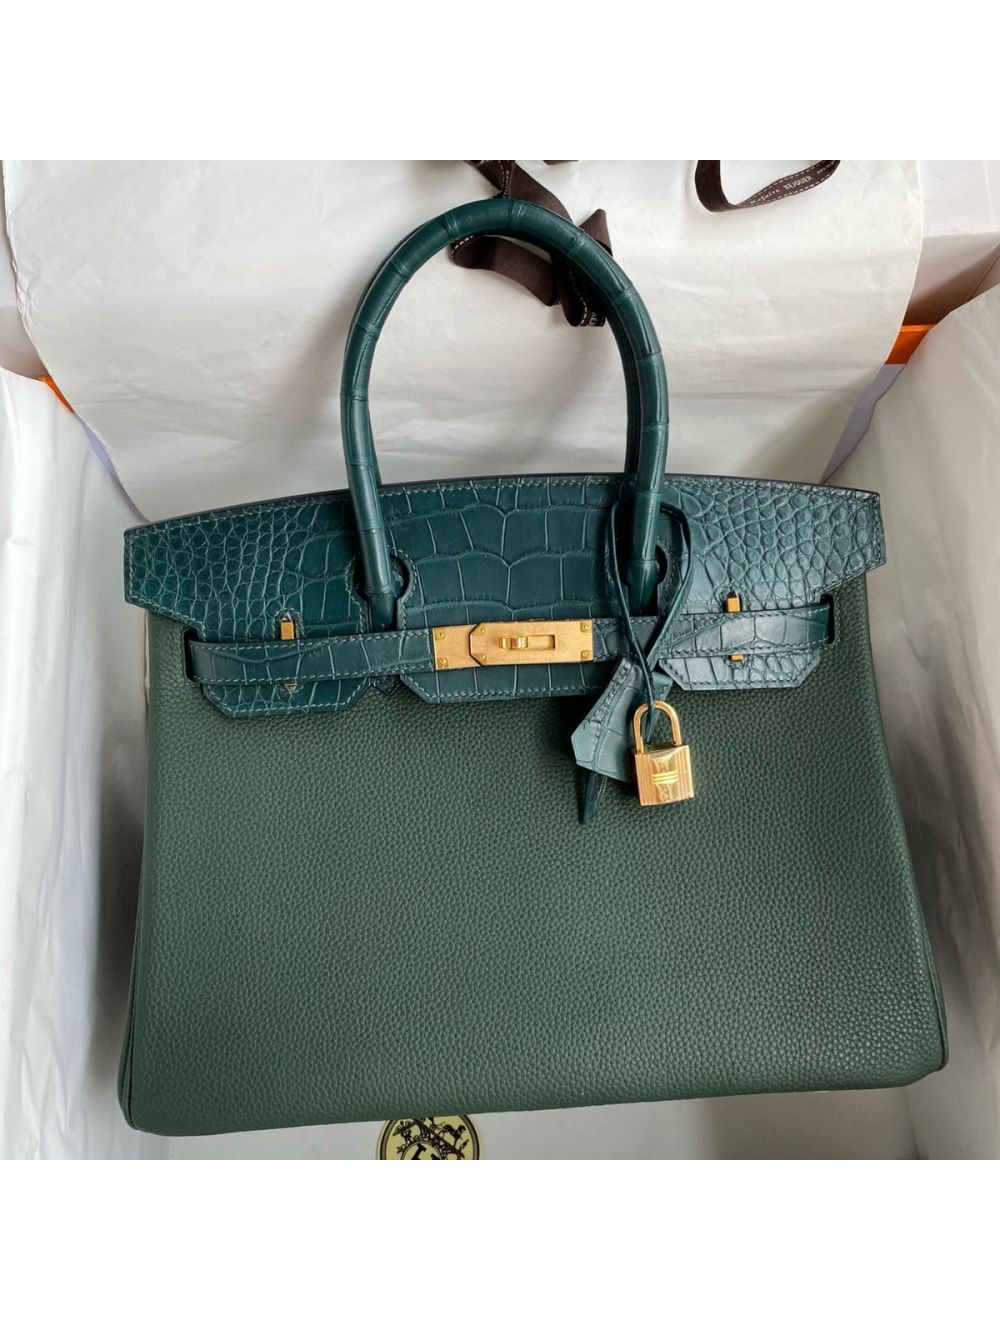 Replica Hermes Touch Birkin 30 Bag in Green Clemence and Matte Alligator  Leather